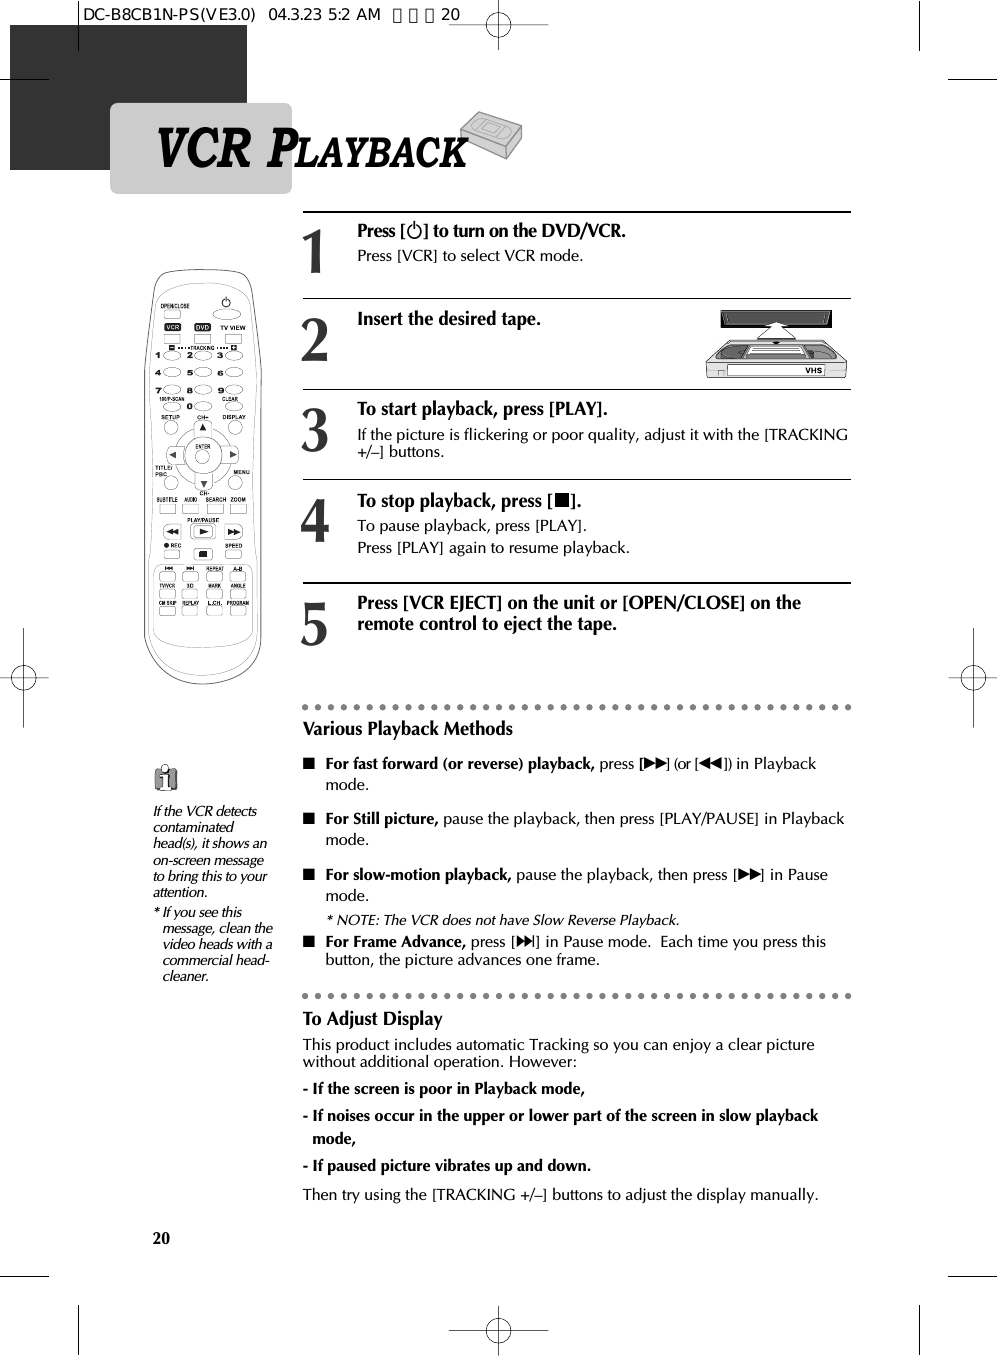 20Press [√] to turn on the DVD/VCR.Press [VCR] to select VCR mode.Insert the desired tape.To start playback, press [PLAY].If the picture is flickering or poor quality, adjust it with the [TRACKING+/–] buttons. 123To stop playback, press [ ]. To pause playback, press [PLAY]. Press [PLAY] again to resume playback.4Press [VCR EJECT] on the unit or [OPEN/CLOSE] on theremote control to eject the tape. 5Various Playback Methods■For fast forward (or reverse) playback, press [√√] (or [œœ ]) in Playbackmode.■For Still picture, pause the playback, then press [PLAY/PAUSE] in Playbackmode.■For slow-motion playback, pause the playback, then press [√√] in Pausemode. * NOTE: The VCR does not have Slow Reverse Playback.■For Frame Advance, press [∞] in Pause mode.  Each time you press thisbutton, the picture advances one frame.If the VCR detectscontaminatedhead(s), it shows anon-screen messageto bring this to yourattention.* If you see thismessage, clean thevideo heads with acommercial head-cleaner.To Adjust DisplayThis product includes automatic Tracking so you can enjoy a clear picturewithout additional operation. However:- If the screen is poor in Playback mode, - If noises occur in the upper or lower part of the screen in slow playbackmode, - If paused picture vibrates up and down.Then try using the [TRACKING +/–] buttons to adjust the display manually.VCR PLAYBACKDC-B8CB1N-PS(VE3.0)  04.3.23 5:2 AM  페이지20